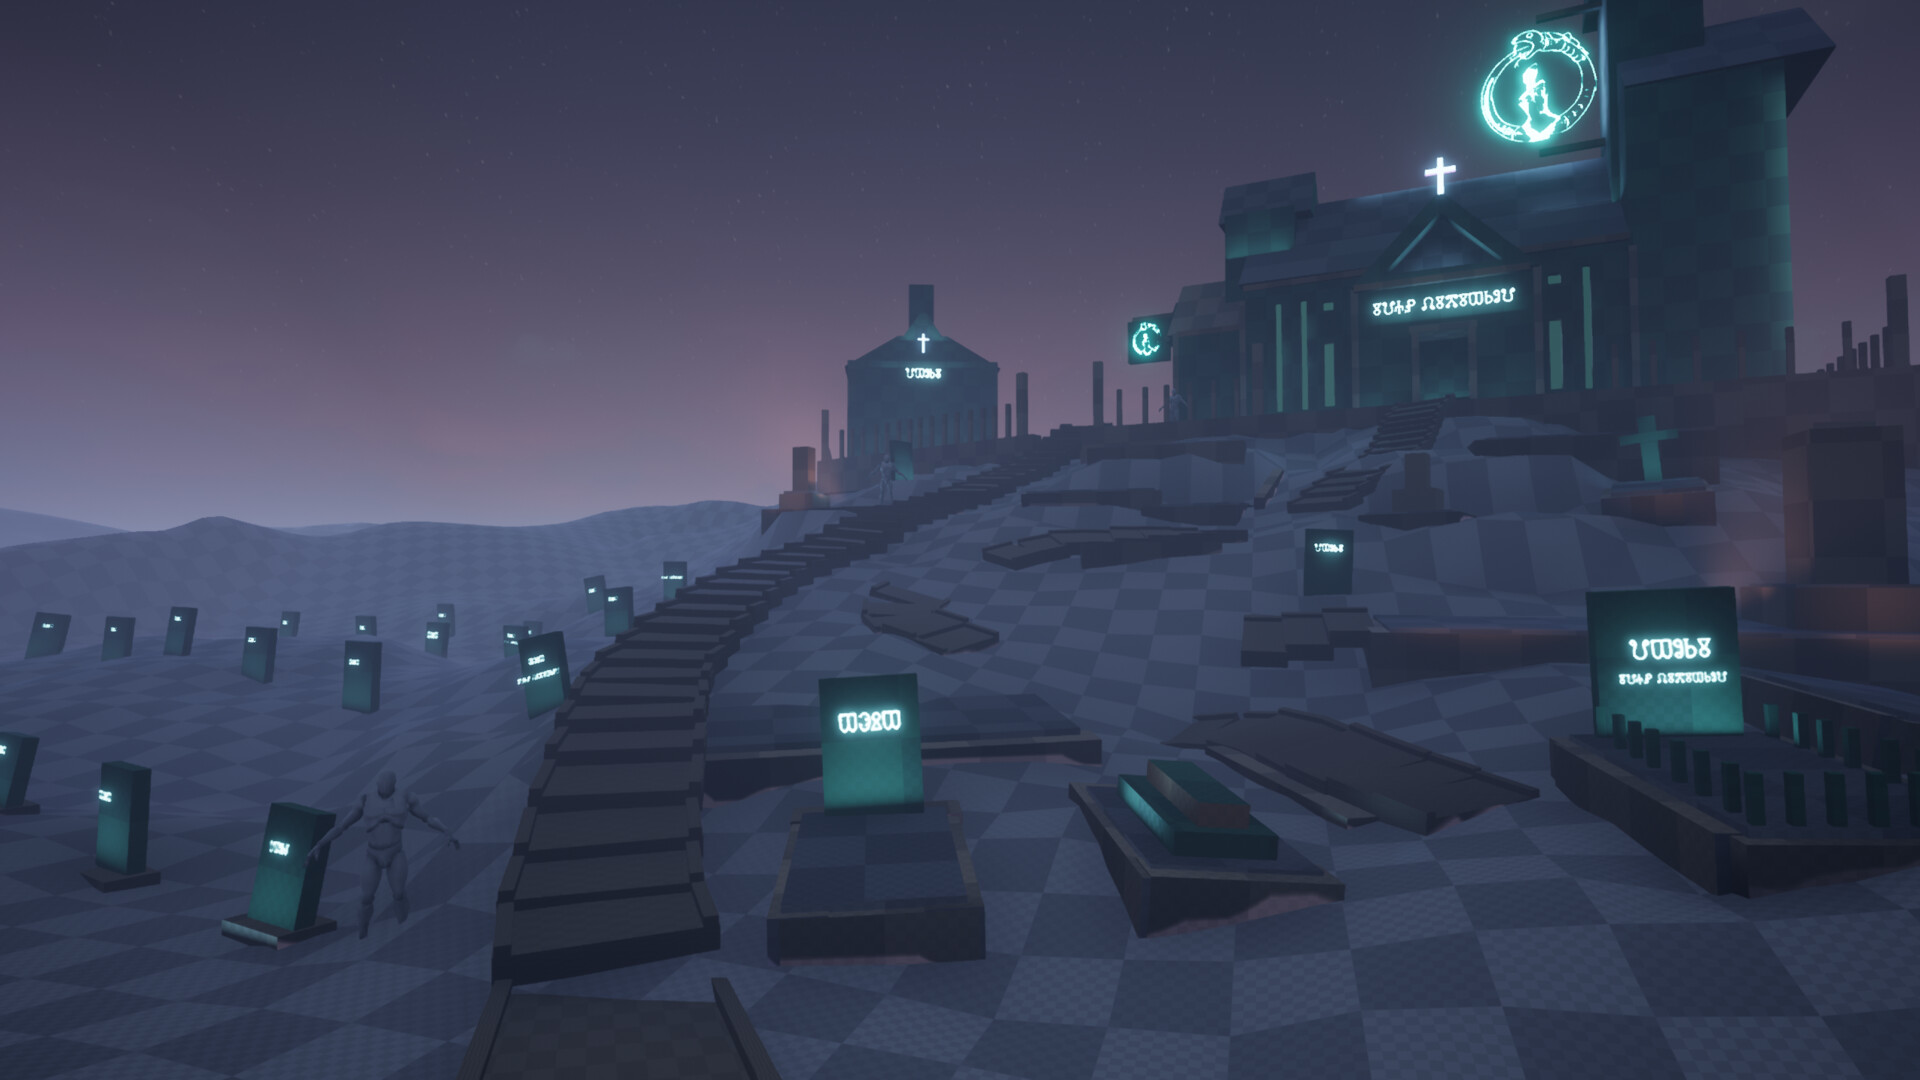 Early blockout screenshot from the project “The Neon Graveyard”. Created in Unreal Engine 4. Image showcases a small hill with a chapel on it. The chapel has neon signs attached. In front of that are lots of gravestones.